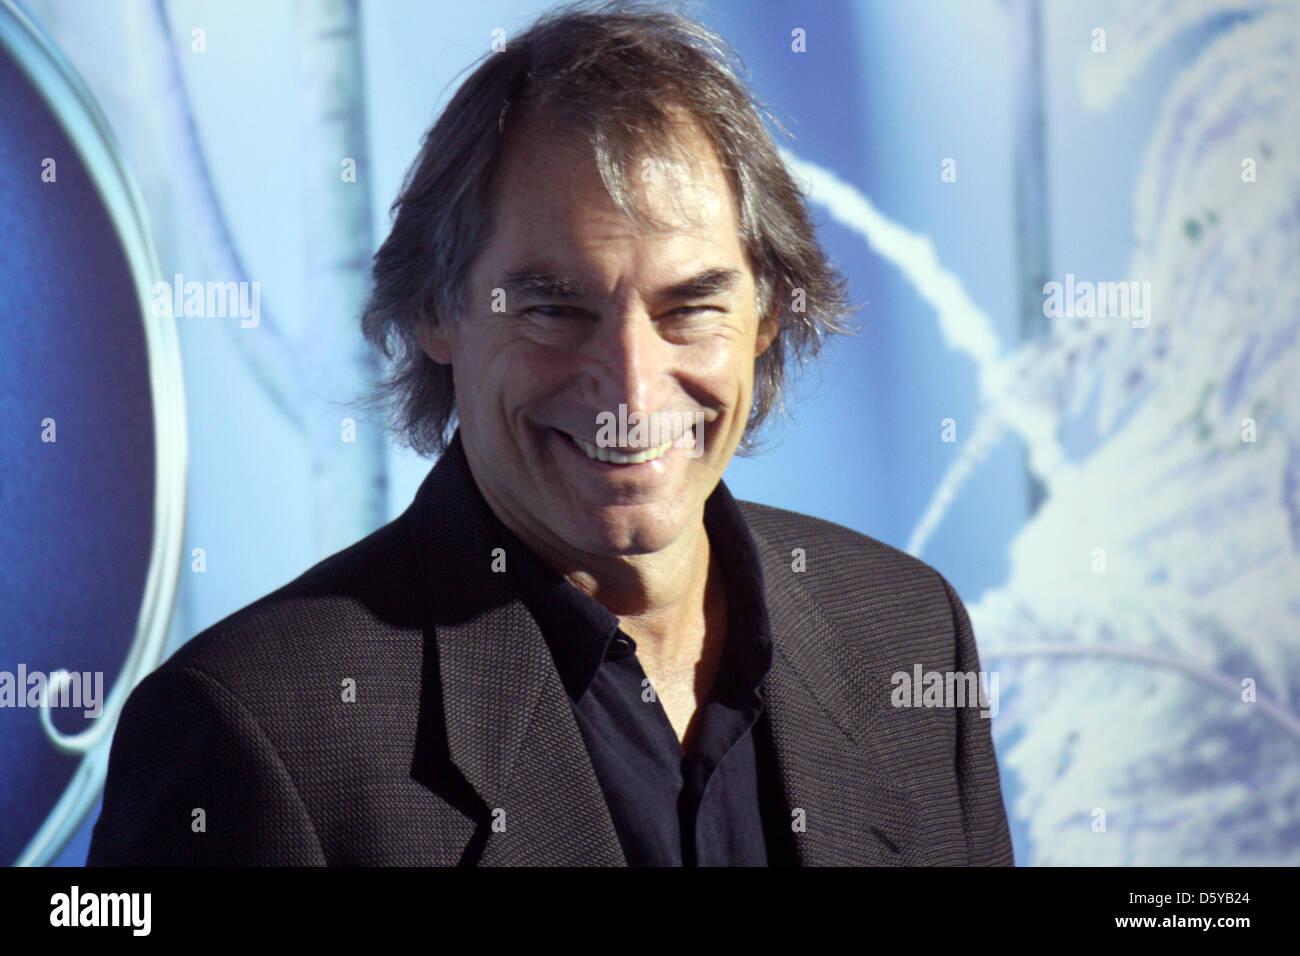 British actor Timothy Dalton arrives at the premiere of the Walt Disney movie 'Secret of the Wings' in New York, USA, 20 October 2012. Photo: Christina Horsten Stock Photo